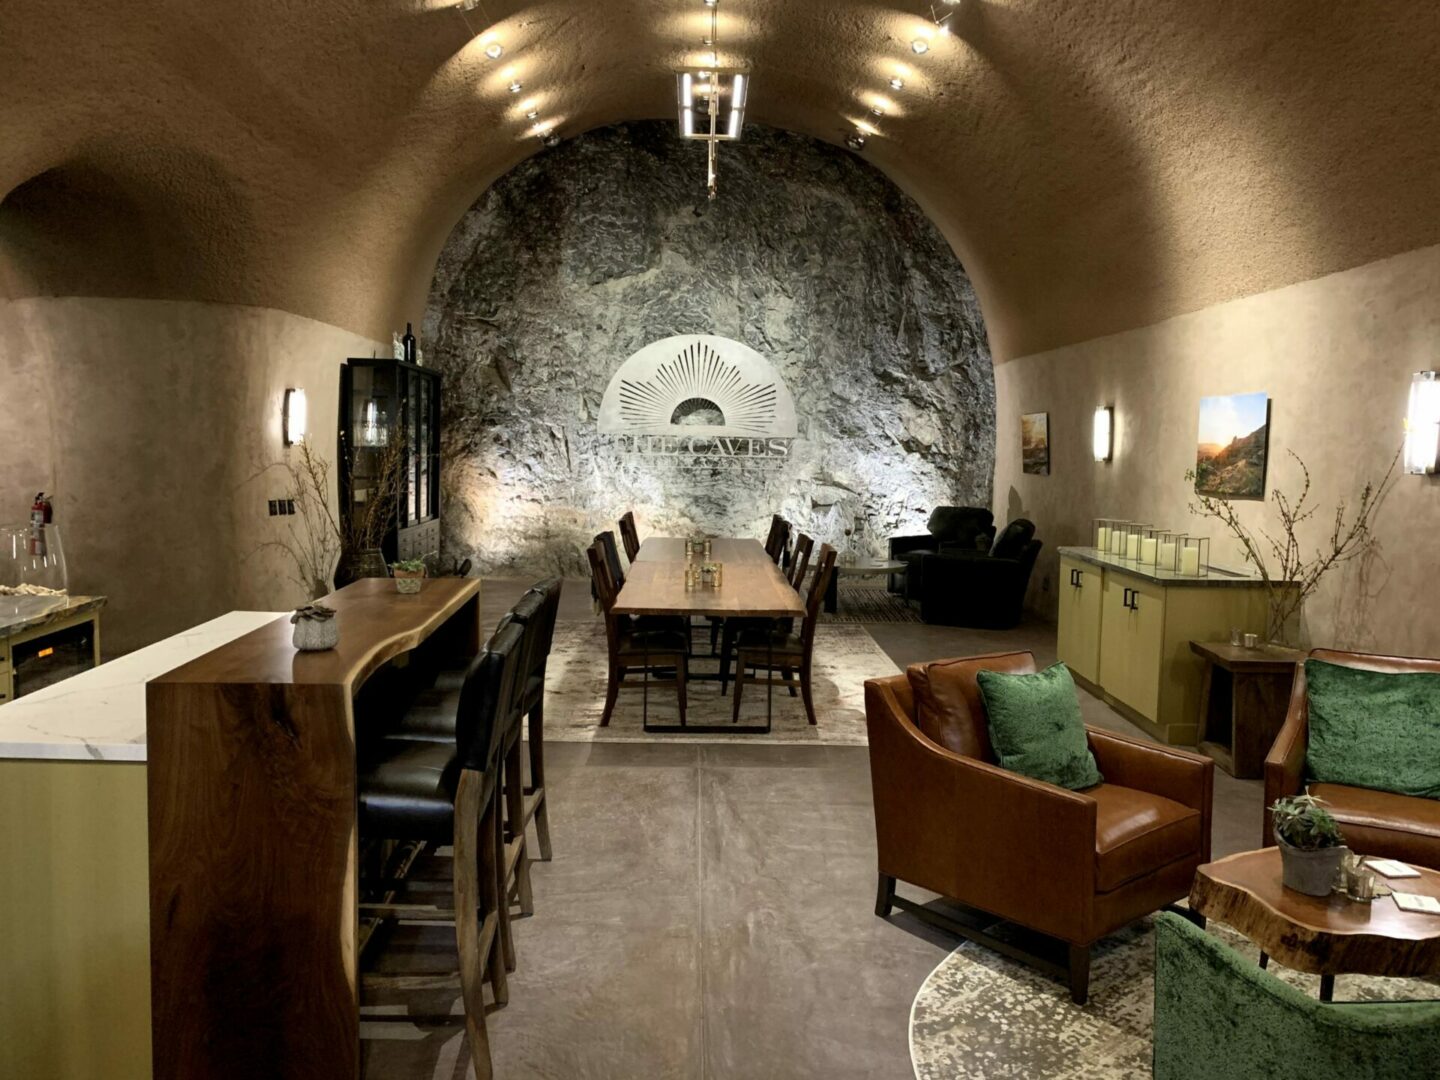 Wine tasting room built into the side of a mountain